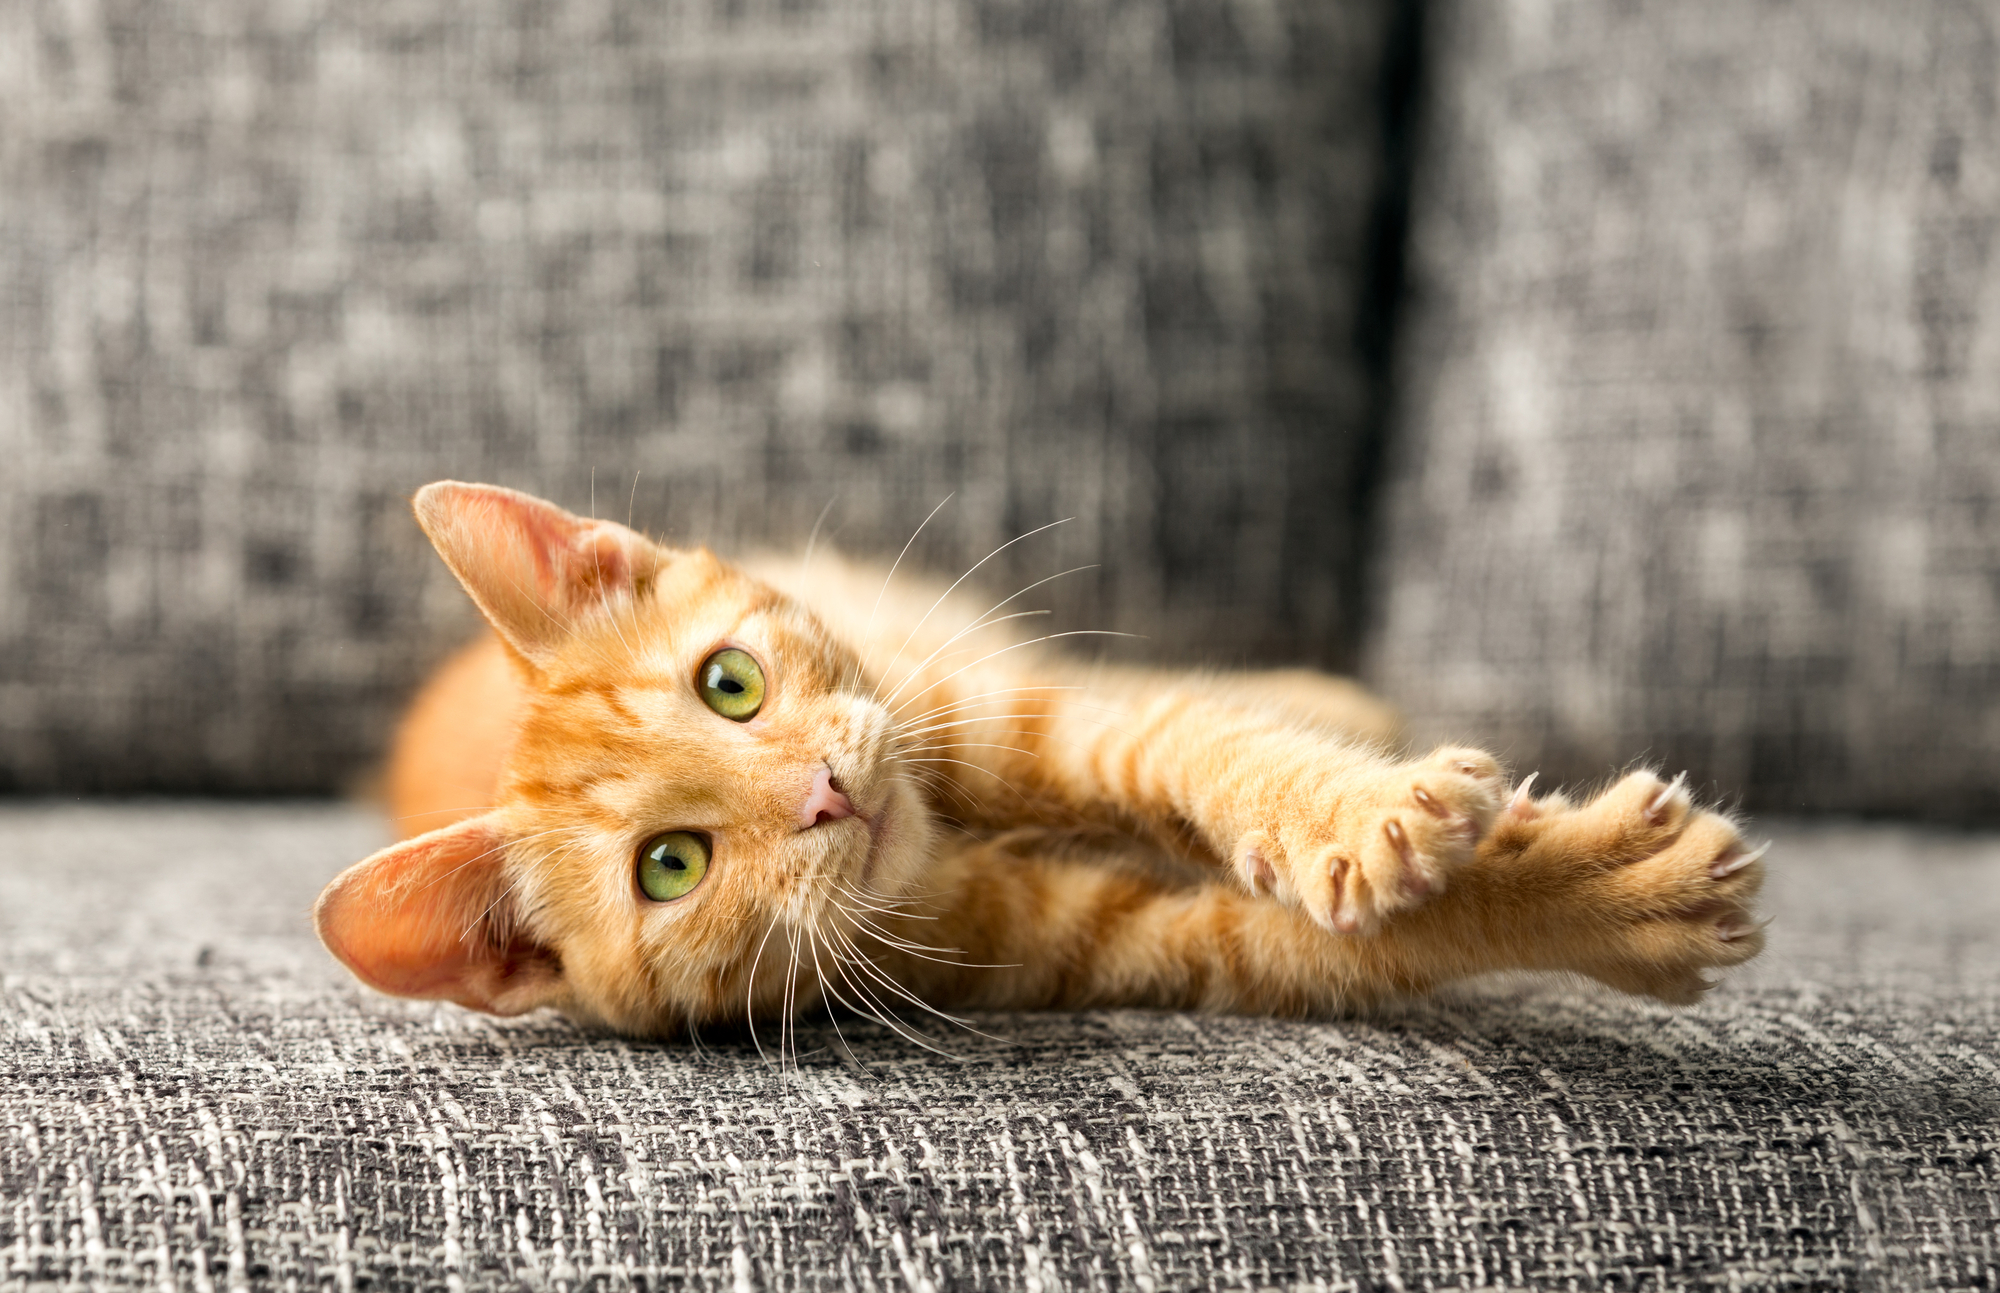 Cat stretching on a couch